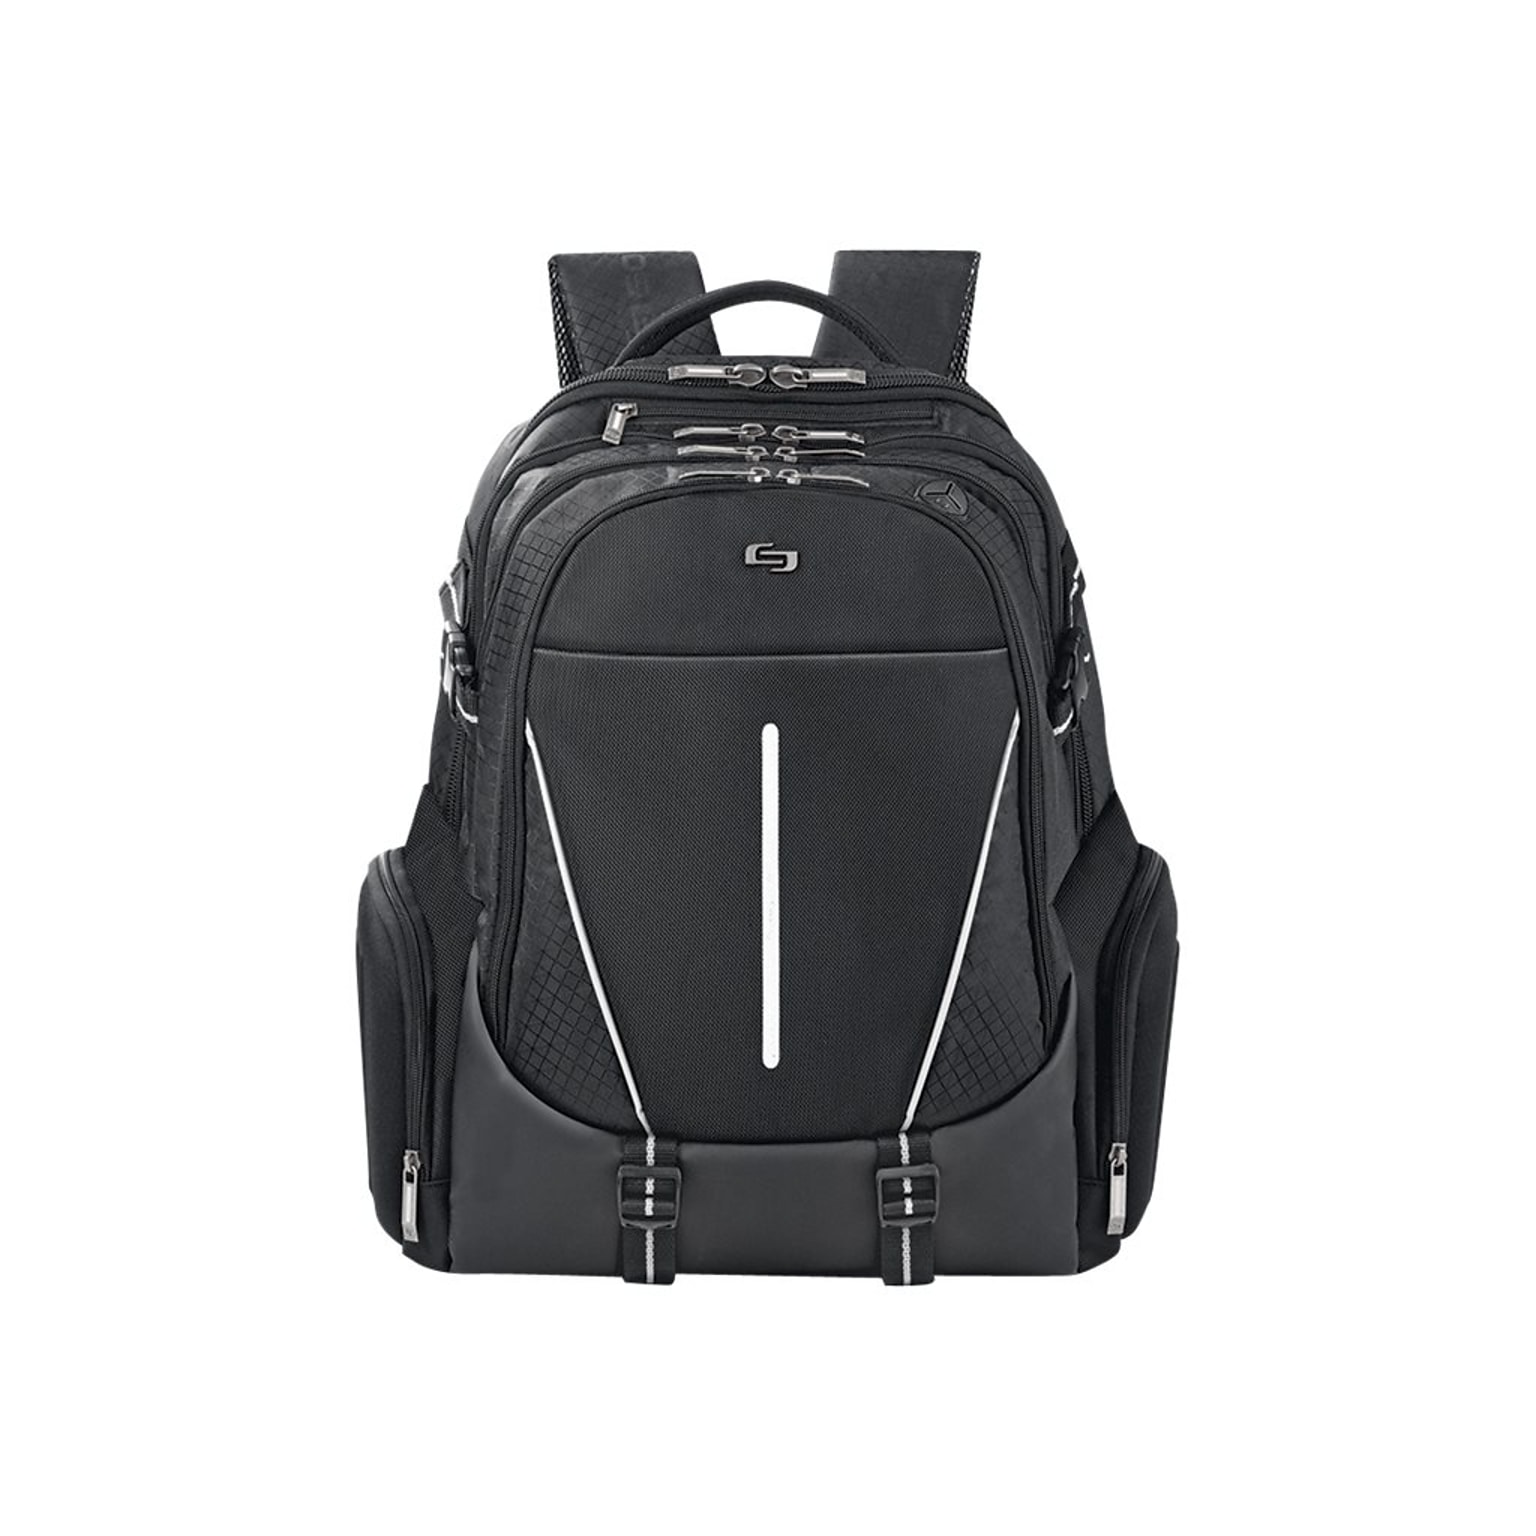 Solo New York 17.3" Laptop Rival Backpack, Black (ACV700-4) | Quill.com